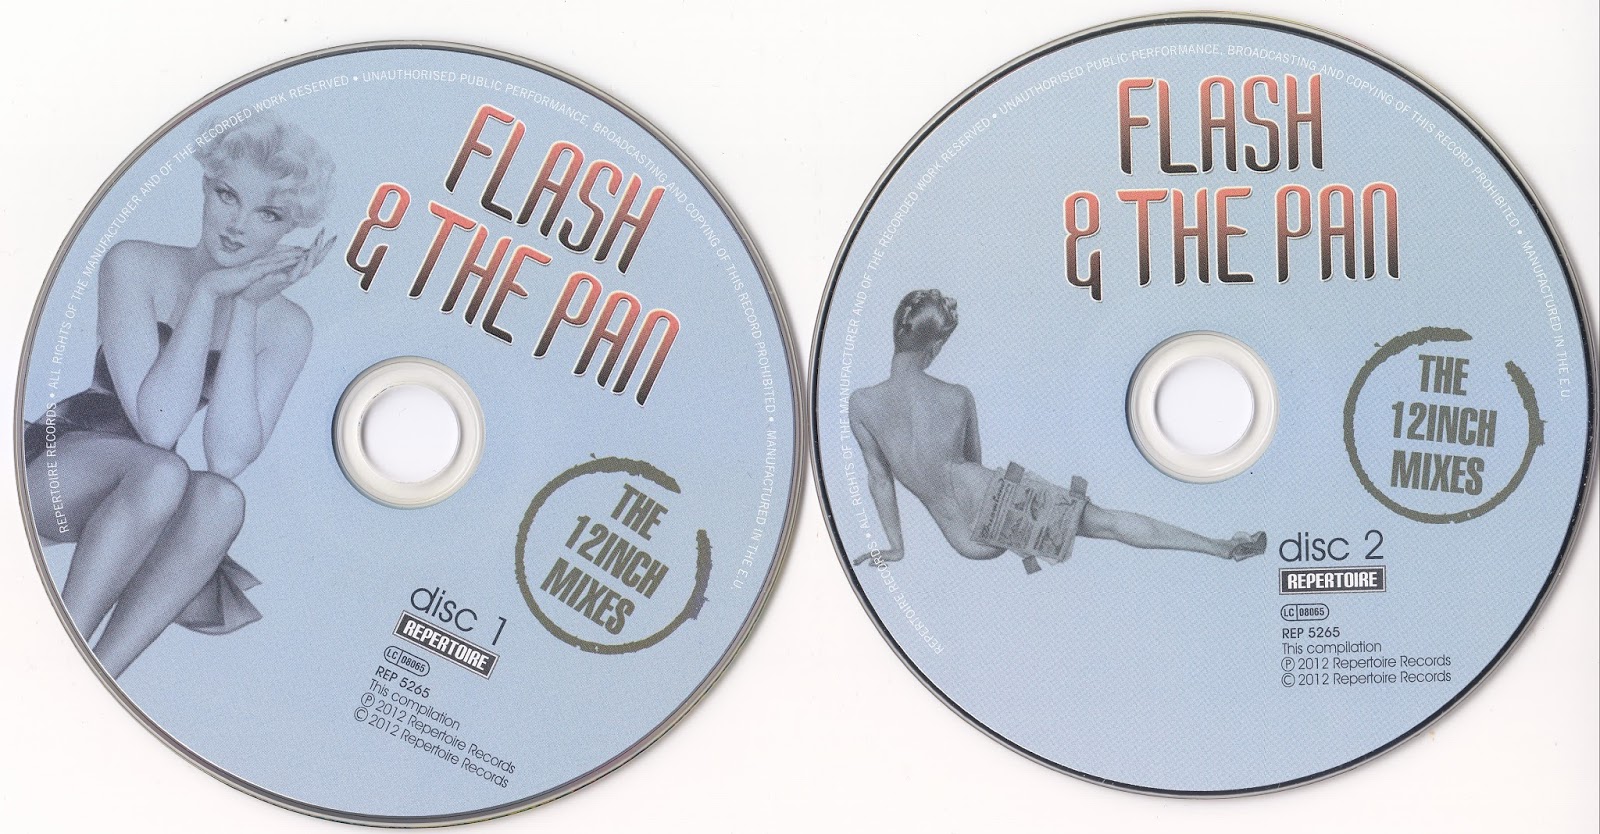 Flash and the Pan 1978. Flash and the Pan - Midnight man. Shakatak the 12 inch Mixes. Flash and the pan